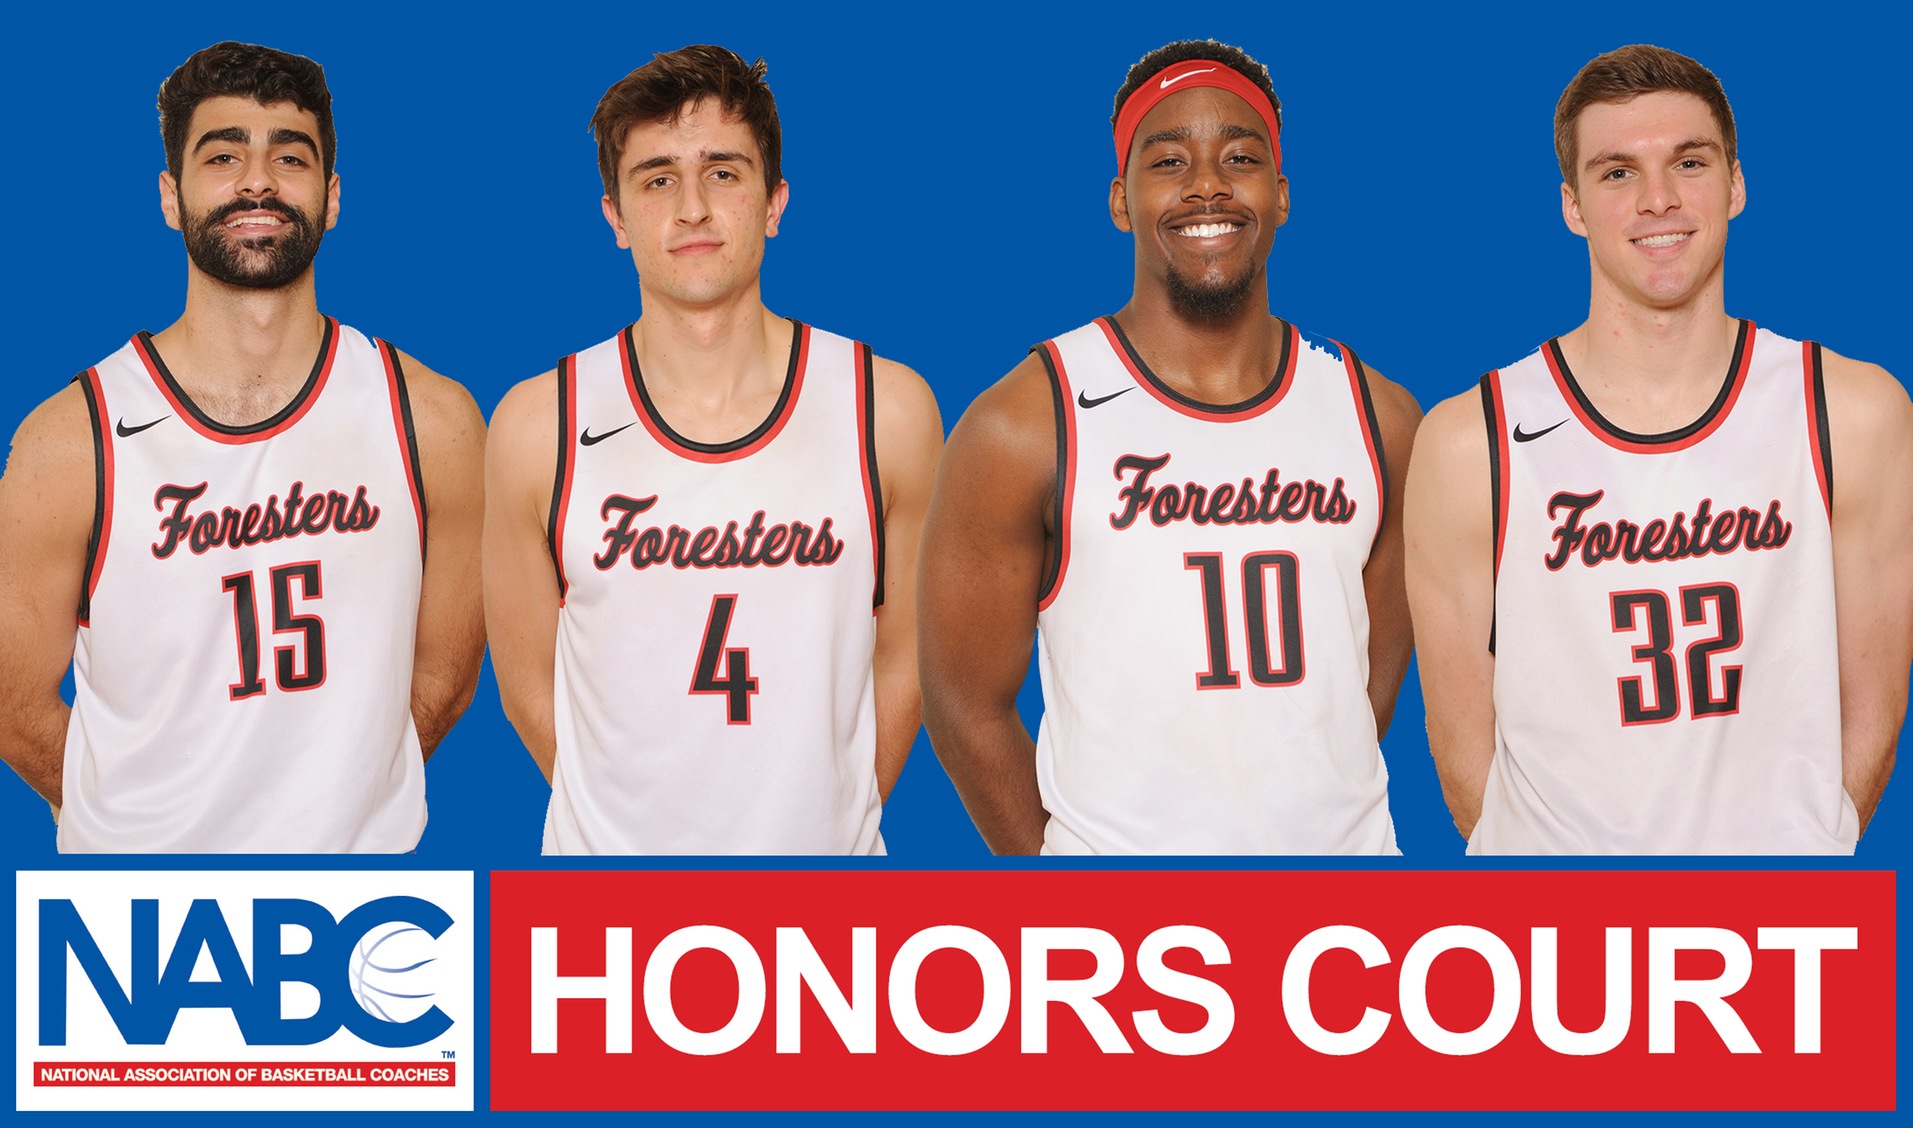 Four Foresters Named to NABC Honors Court